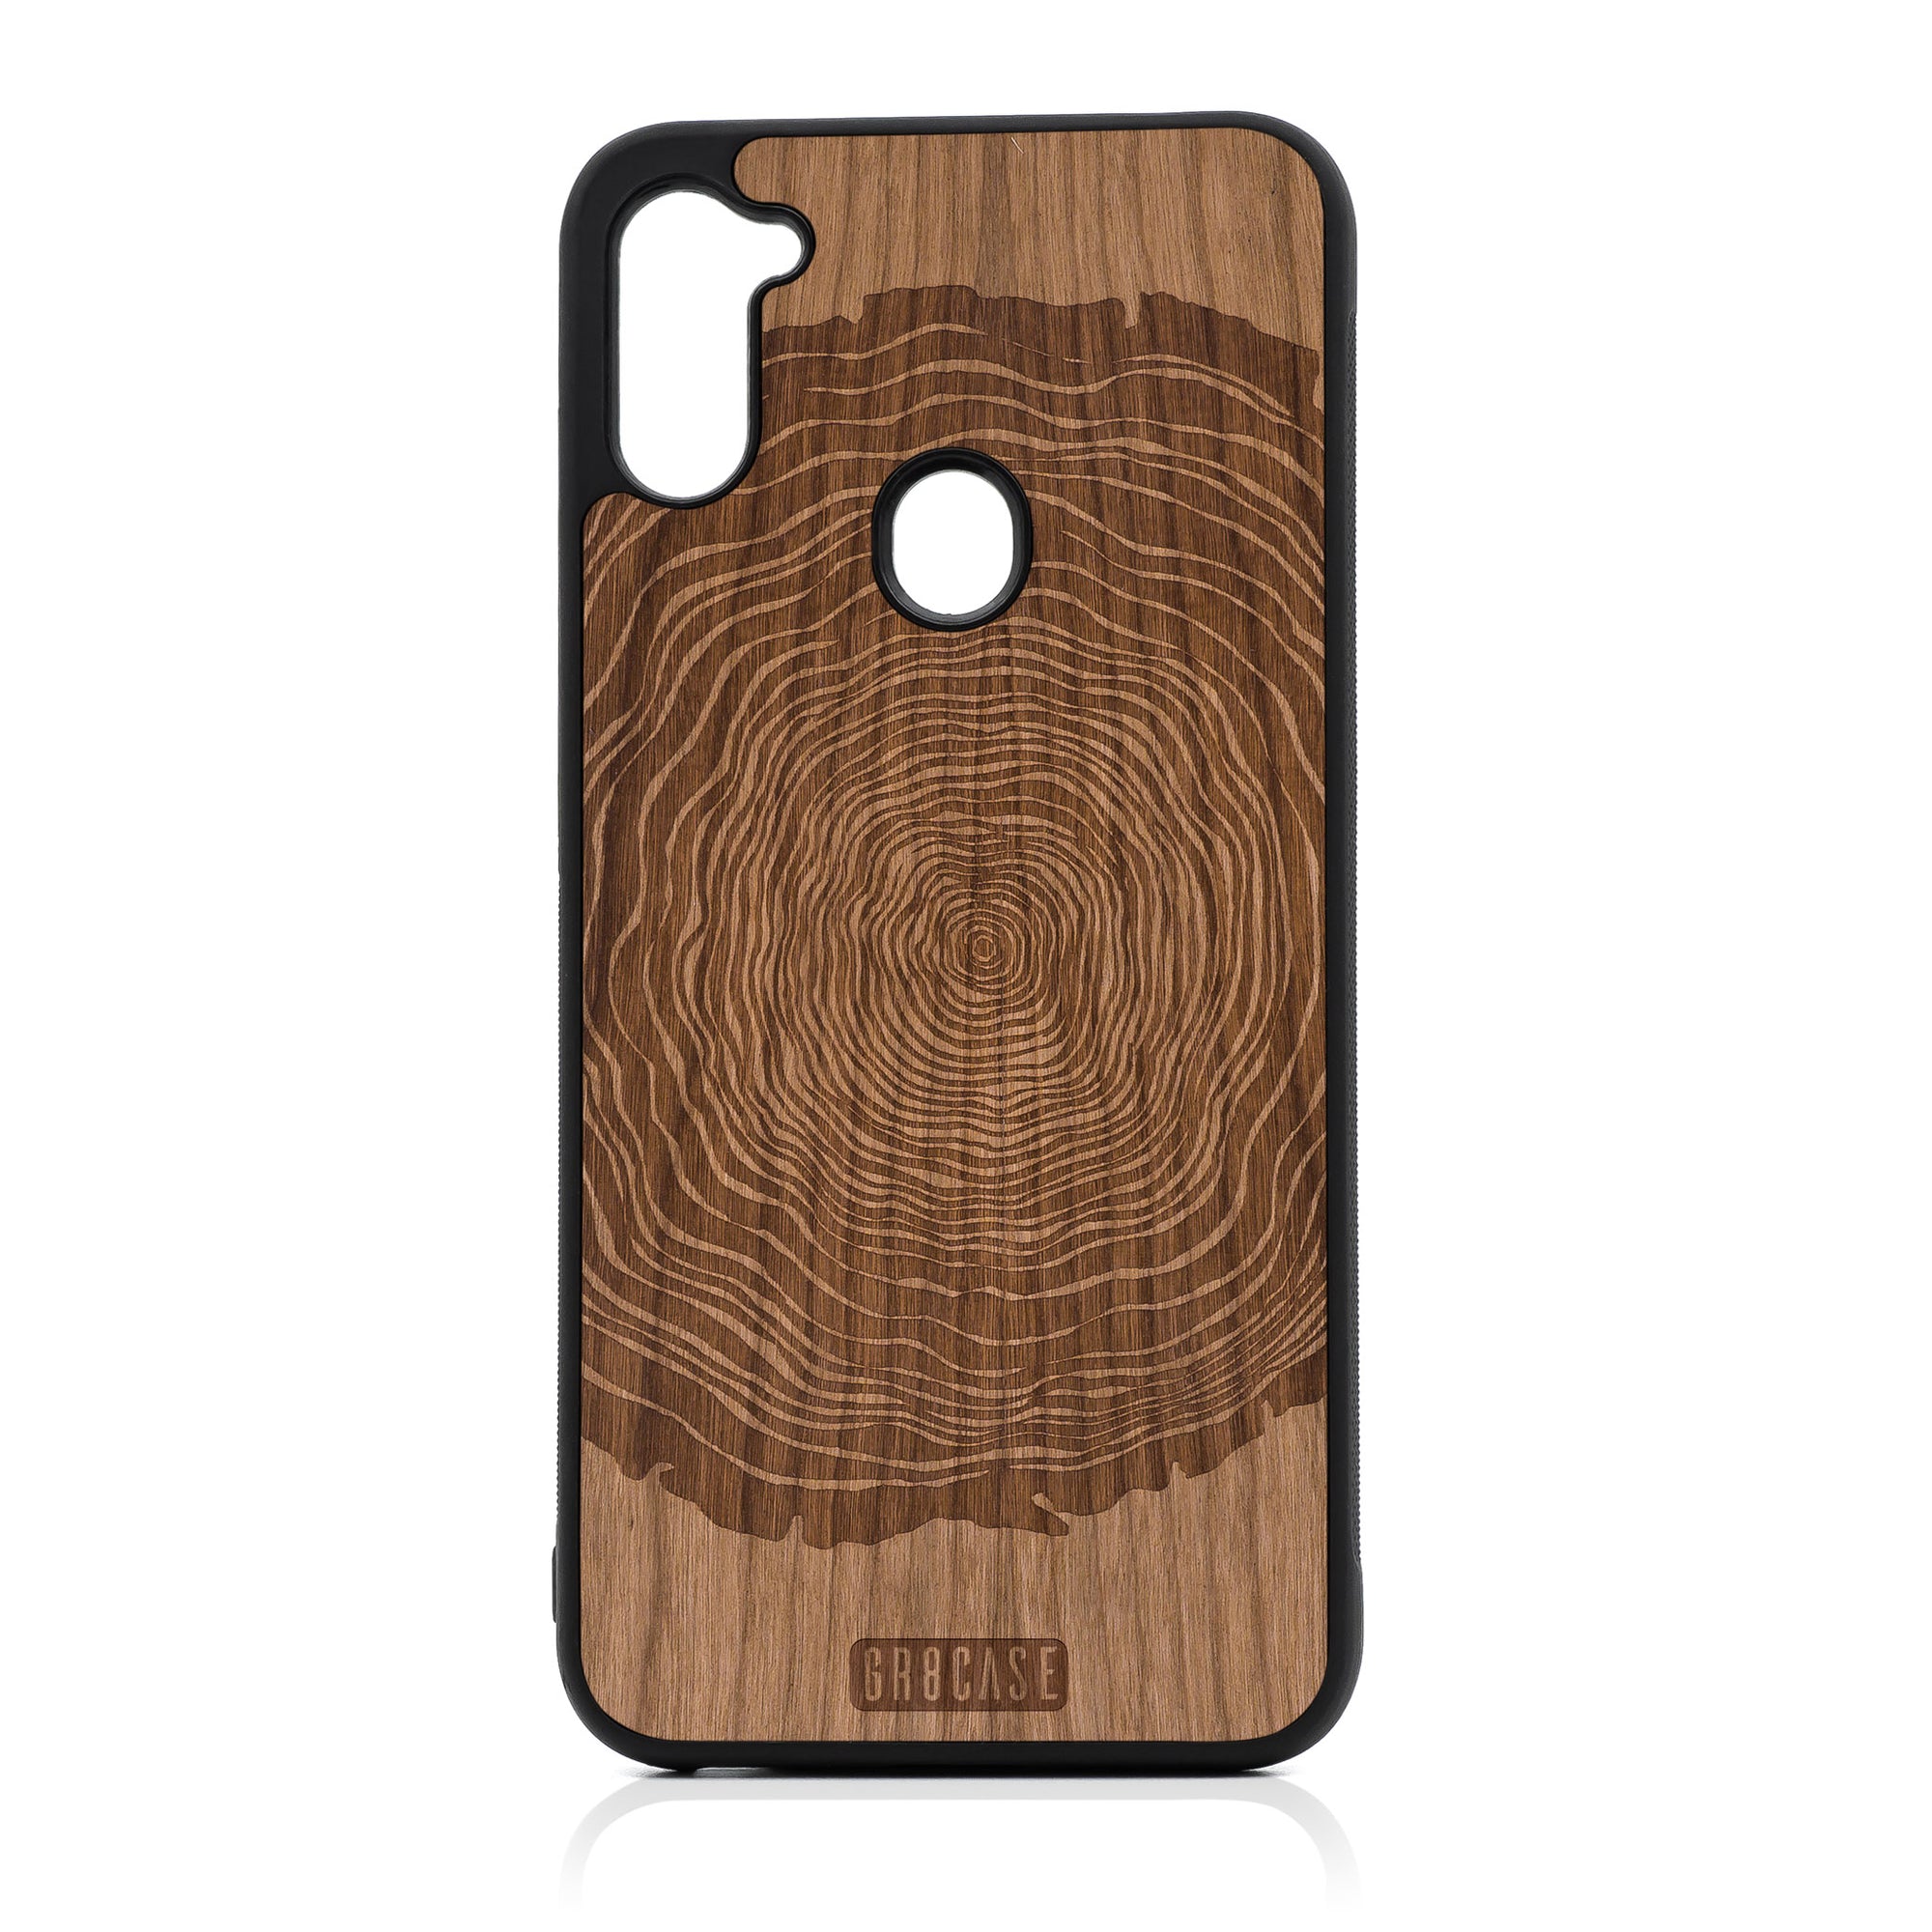 Tree Rings Design Wood Case For Samsung Galaxy A11